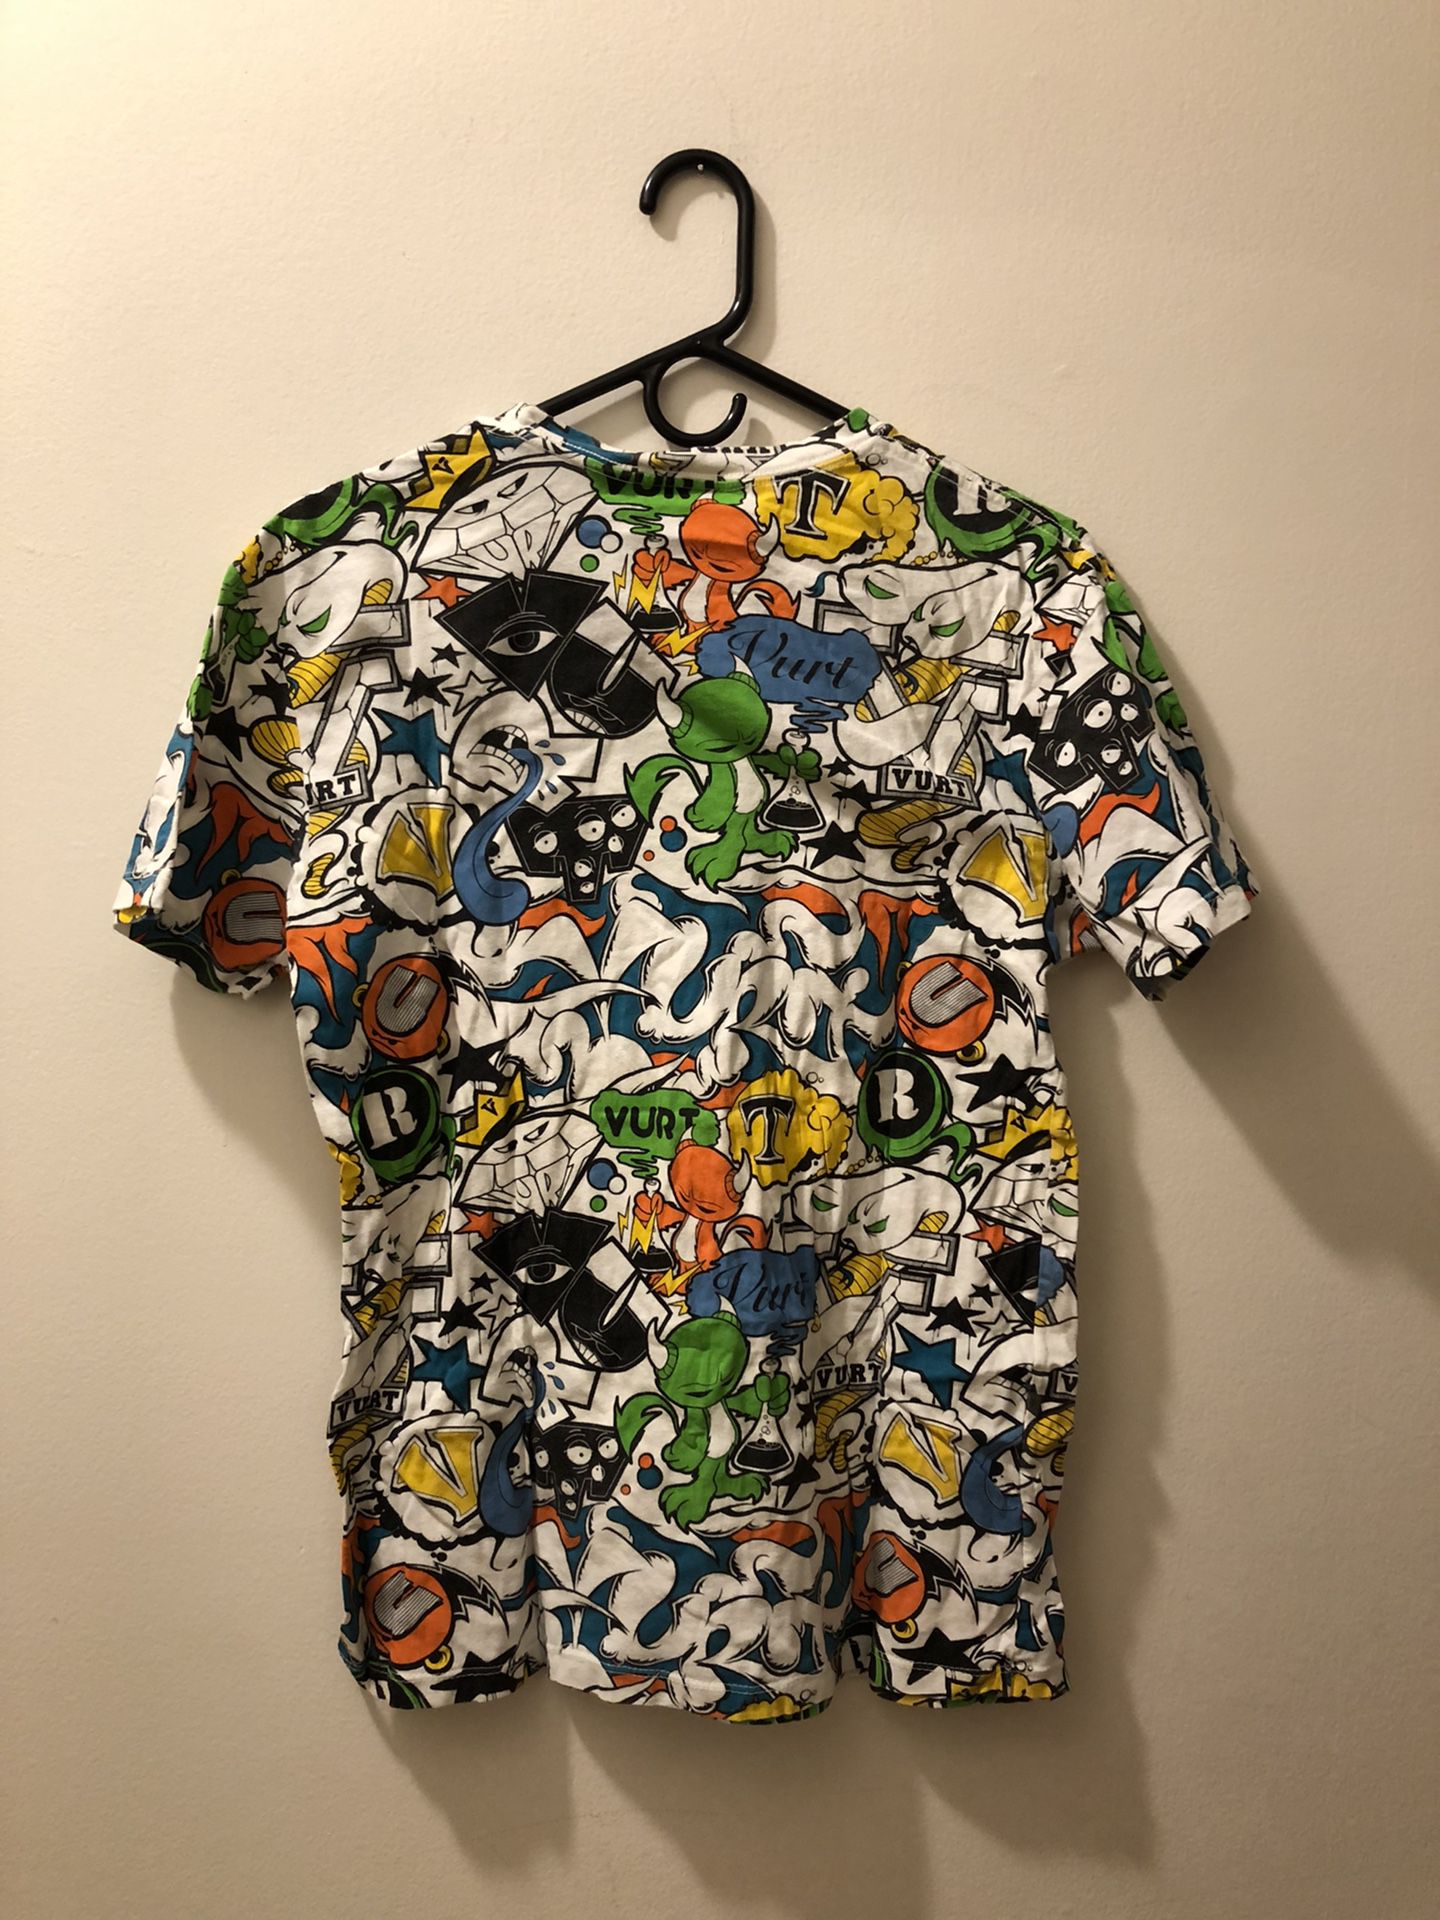 Camel Mens LV Duck T Shirt for Sale in Ontario, CA - OfferUp